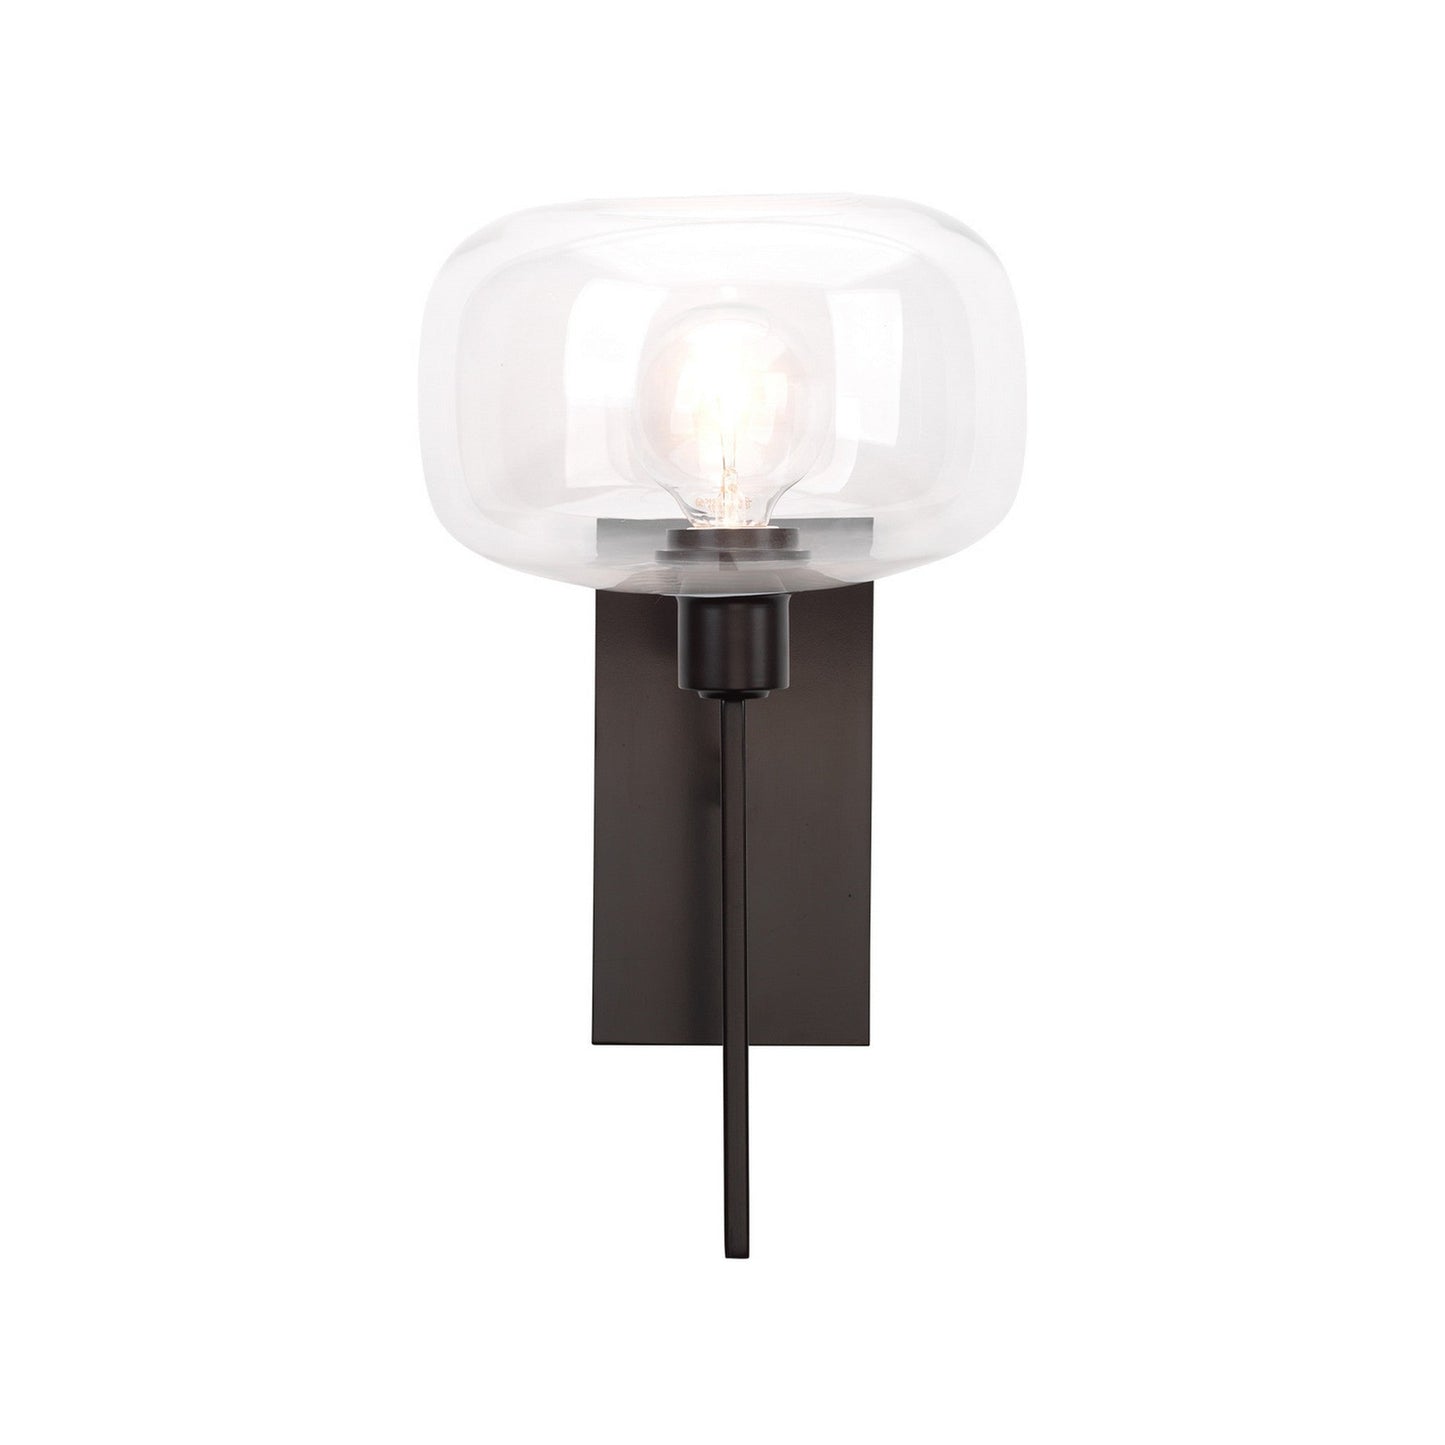 Jamie Young Scando 9" x 14 1-Light Oil Rubbed Bronze Wall Sconce With Clear Blown Glass Shade